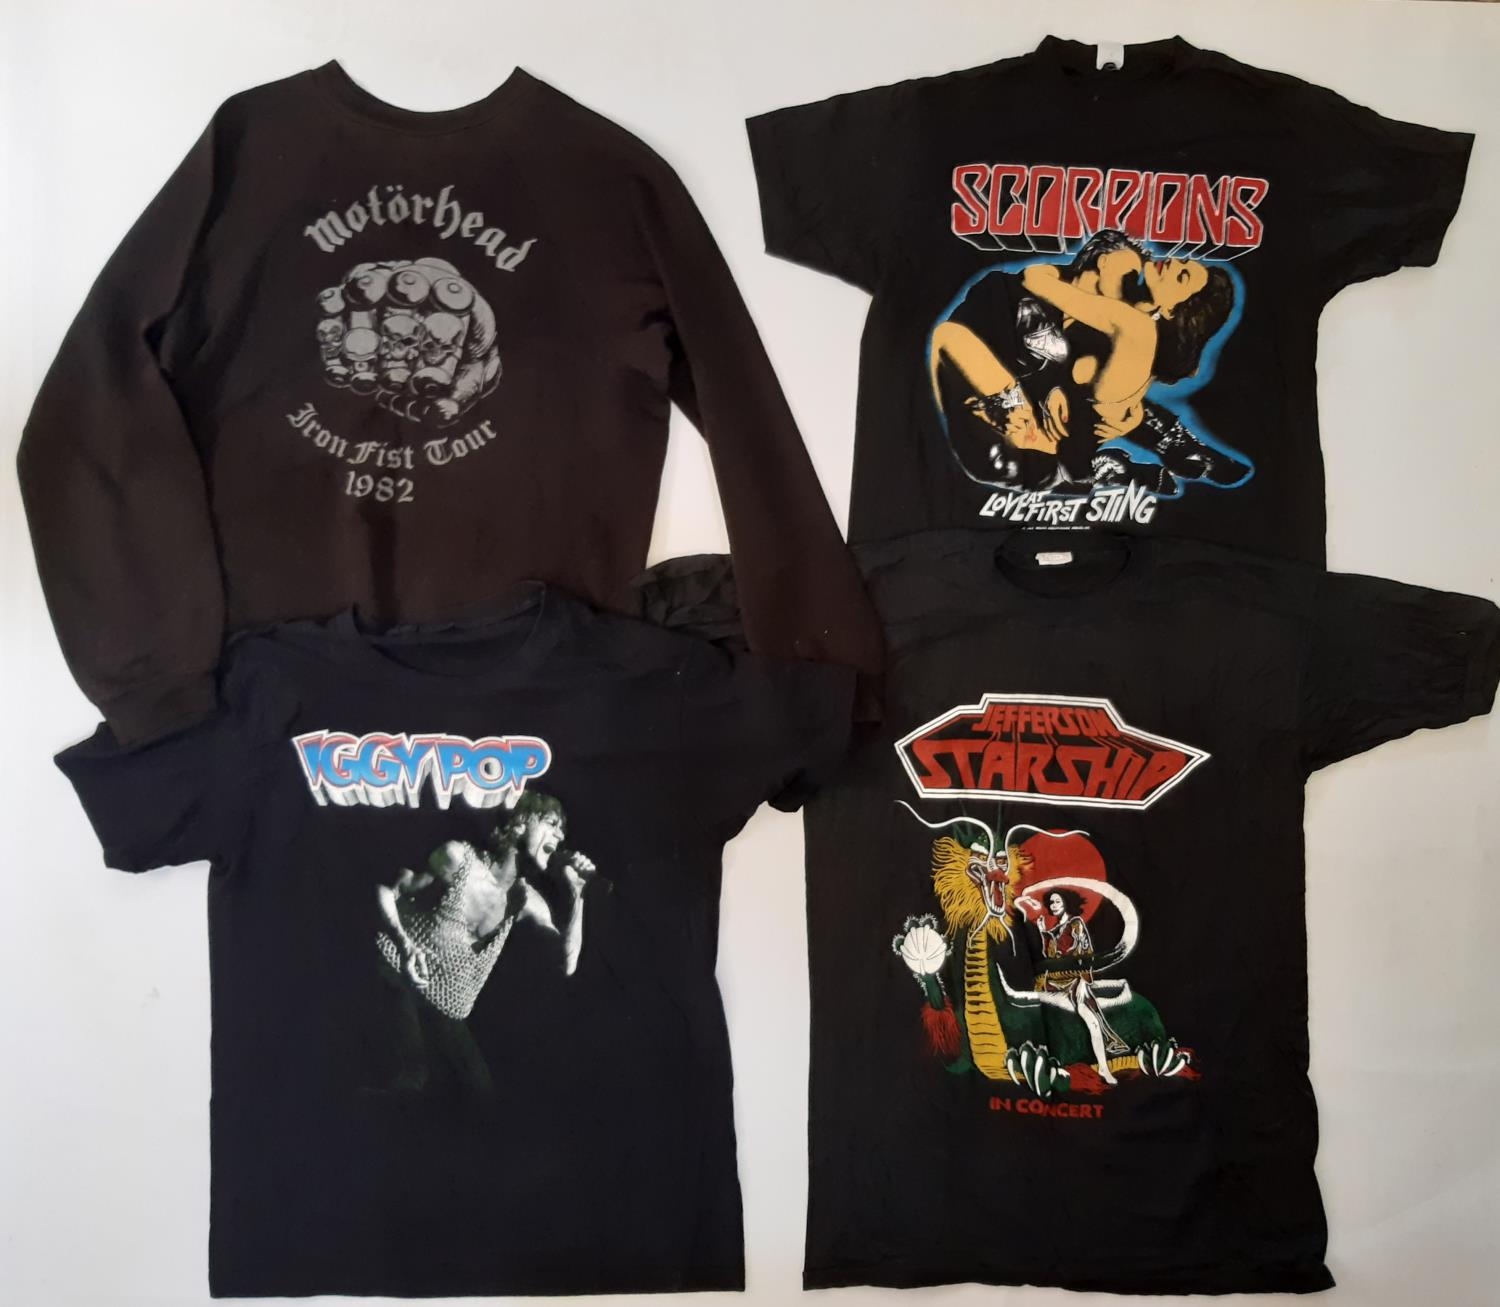 7 vintage garments featuring iconic bands including a tour sweatshirt for Motorhead 'Iron Fist' tour - Image 3 of 4